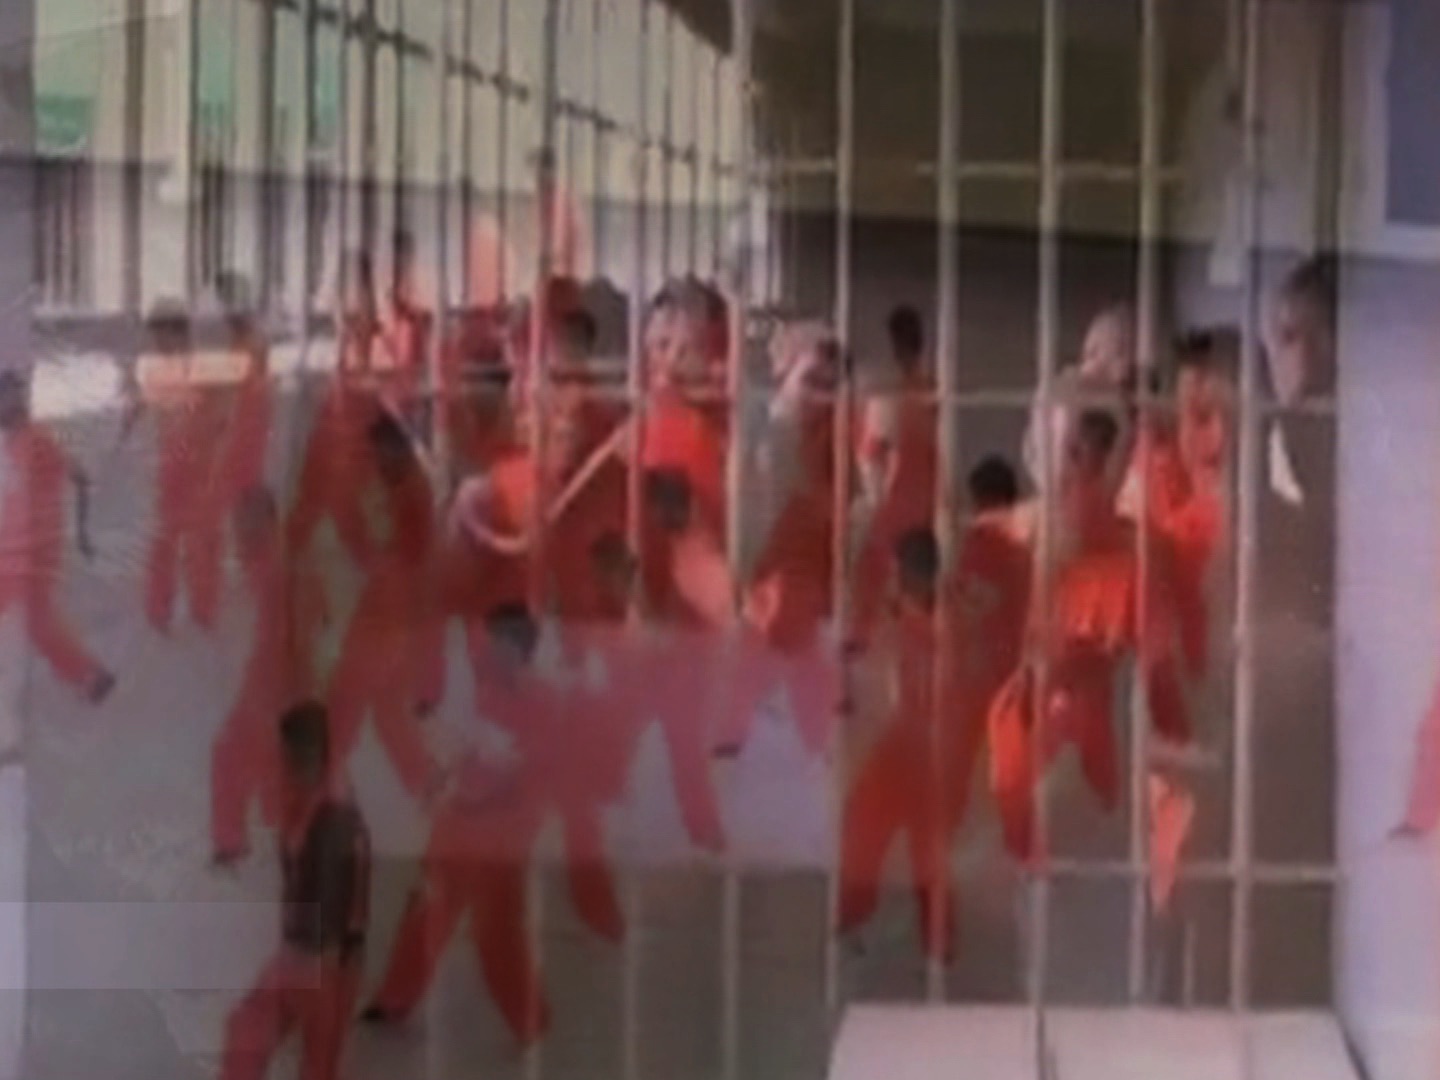 image of figures in red jumpsuits dancing superimposed with image of jail cell